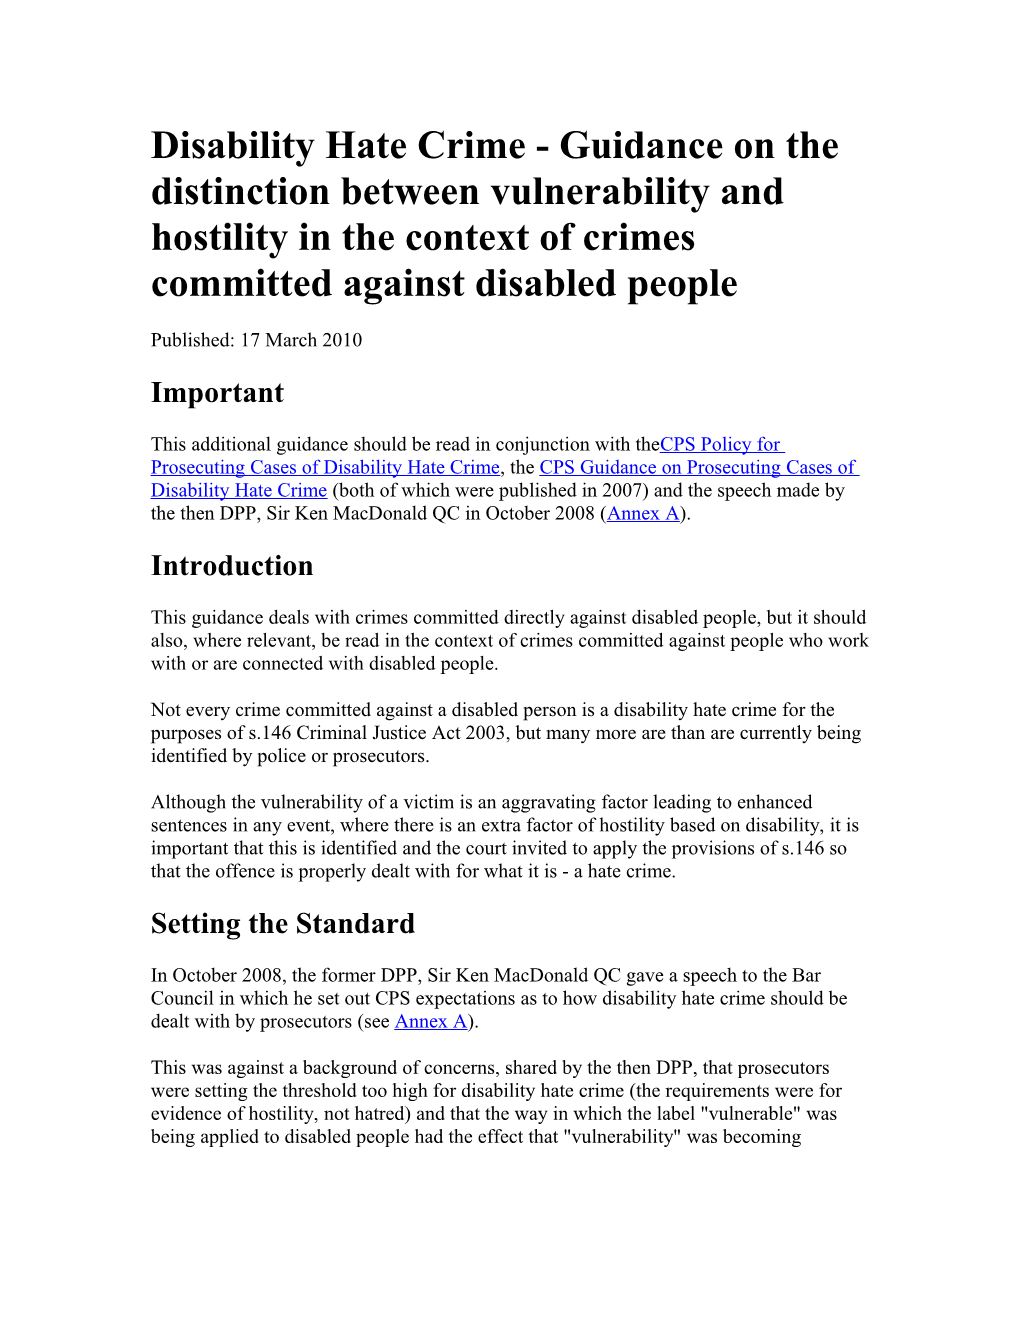 Disability Hate Crime - Guidance on the Distinction Between Vulnerability and Hostility